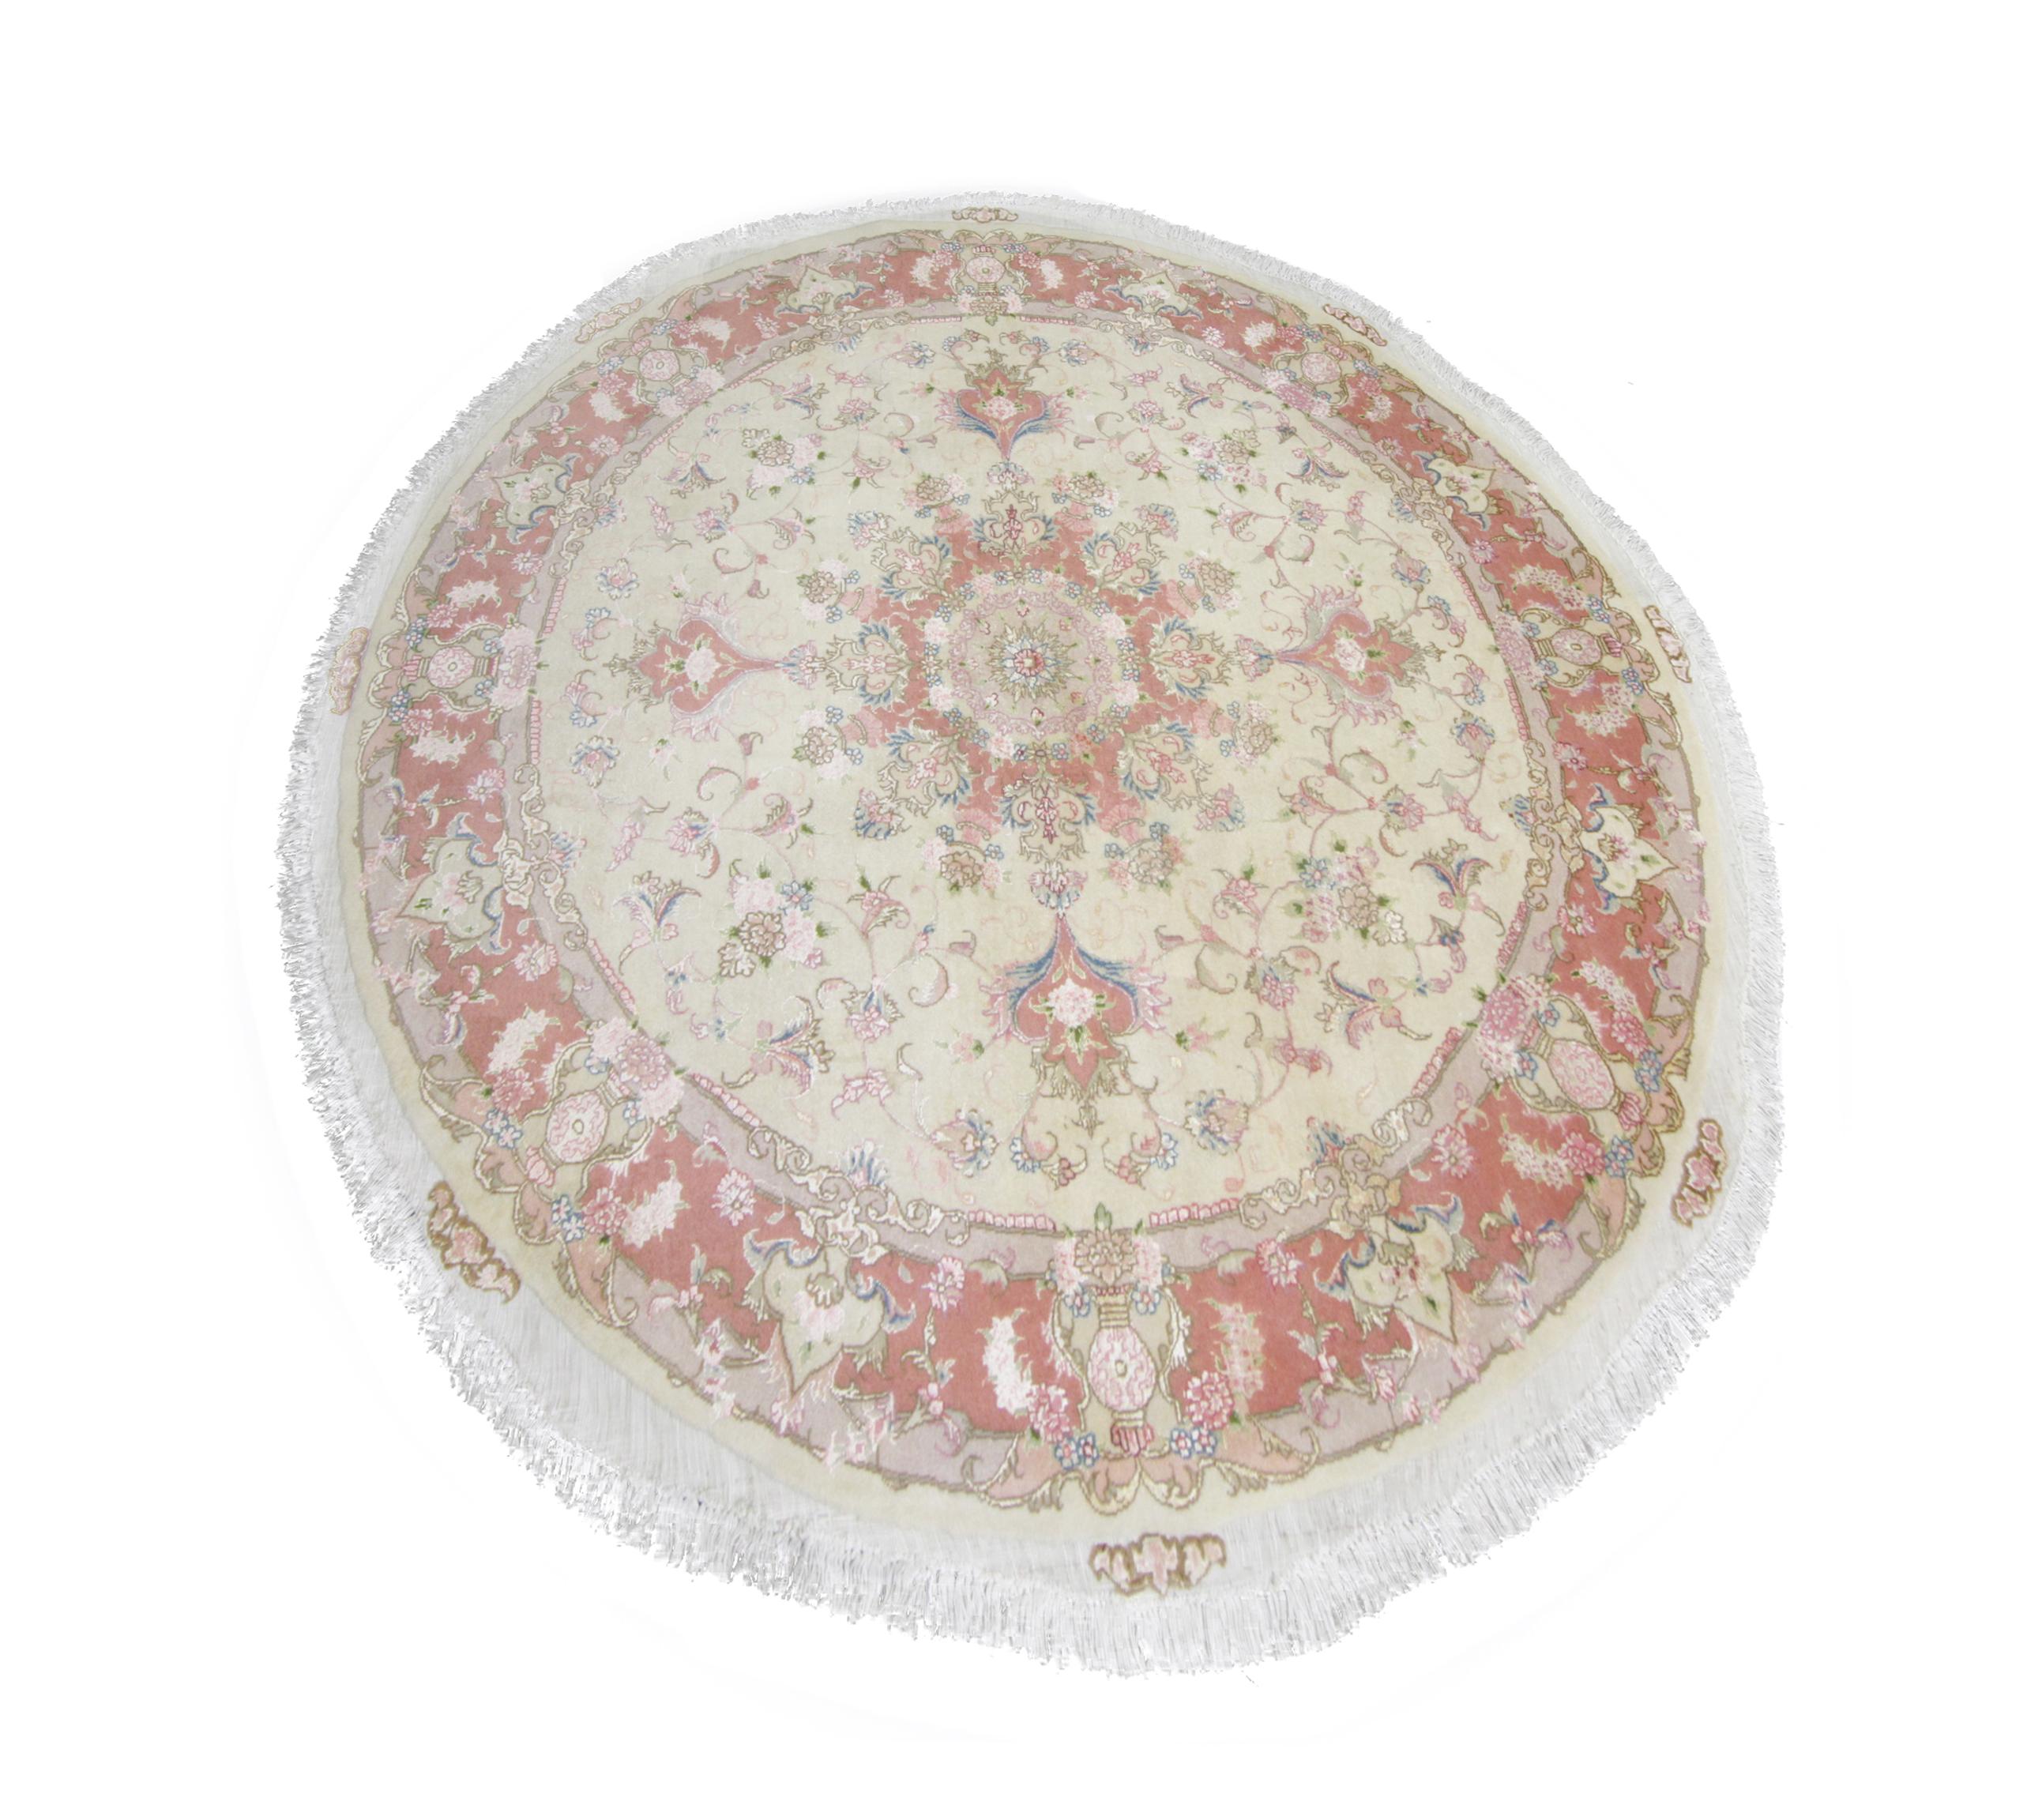 This small circular wool rug was woven in Turkey in the 2000s with fine organic silk and wool materials. The design features a cream background with pink, ivory, blue, and green accents that make up the intricate symmetrical medallion design. This